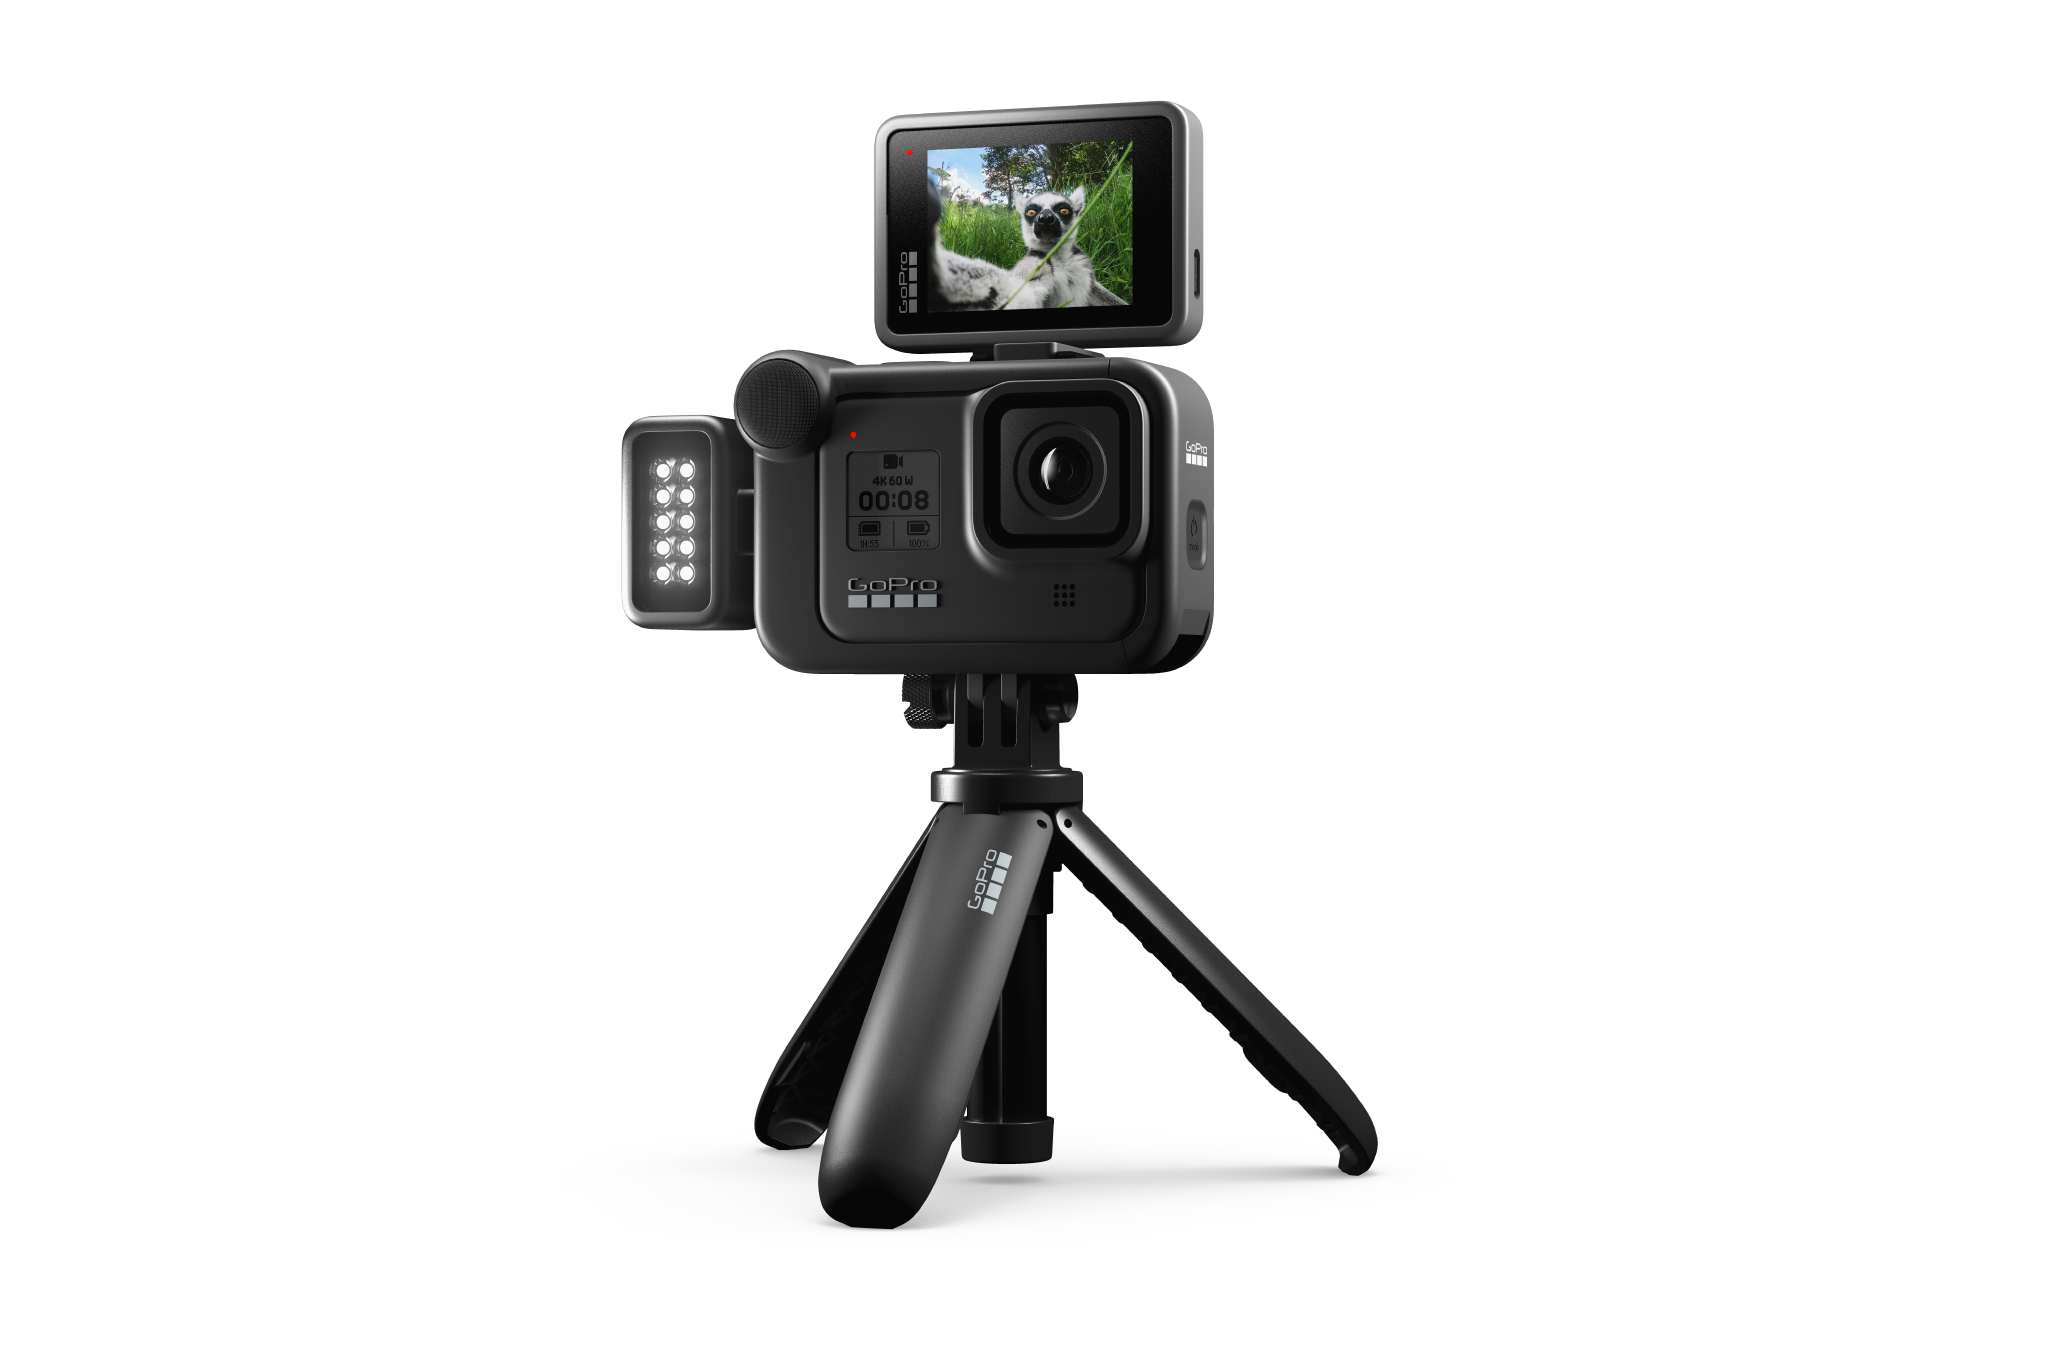 The New Modular Gopro Hero 8 Black Is Here Complete With